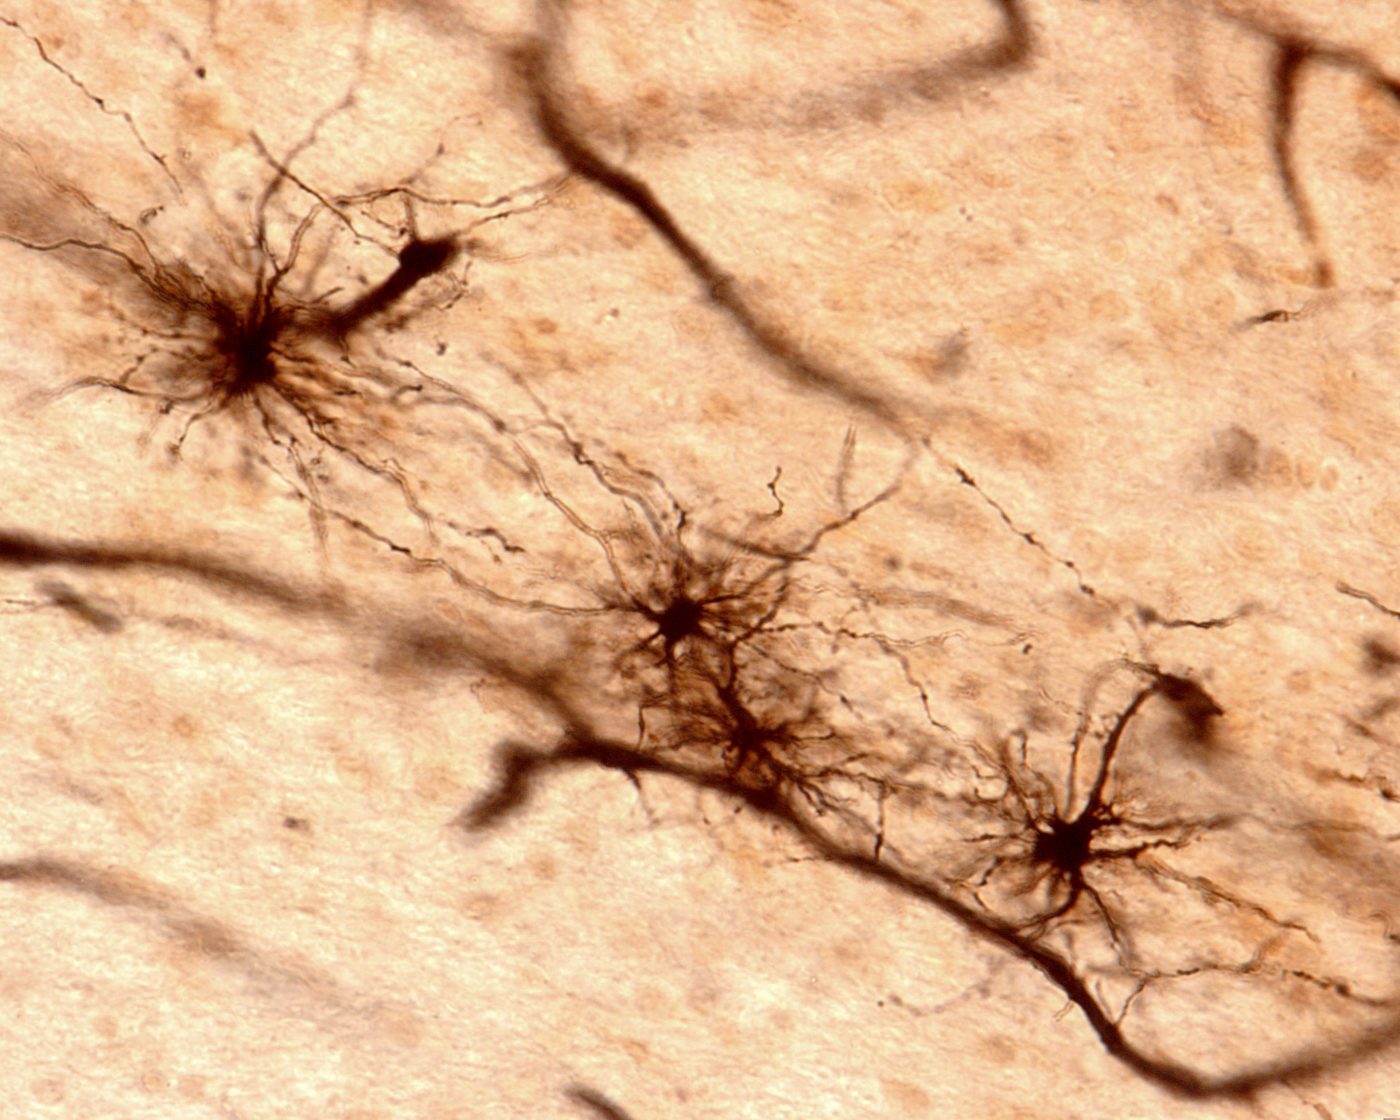 Transplants of Healthy Glial Cell Seen to Prevent ...